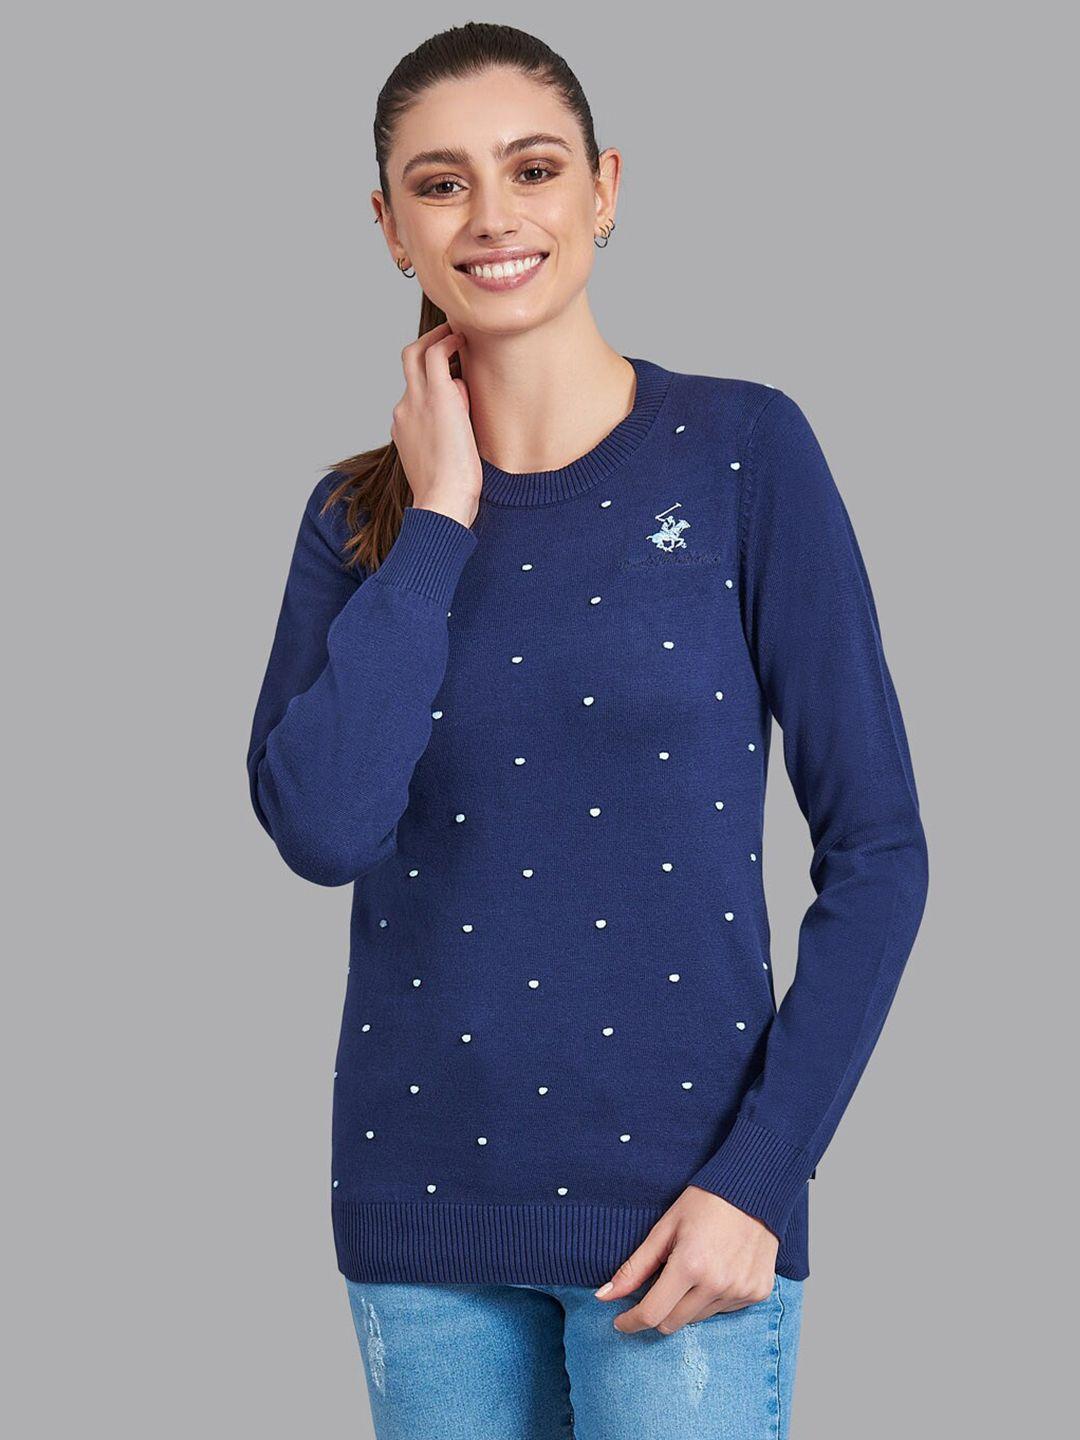 beverly hills polo club women navy blue & white polka dots printed pullover